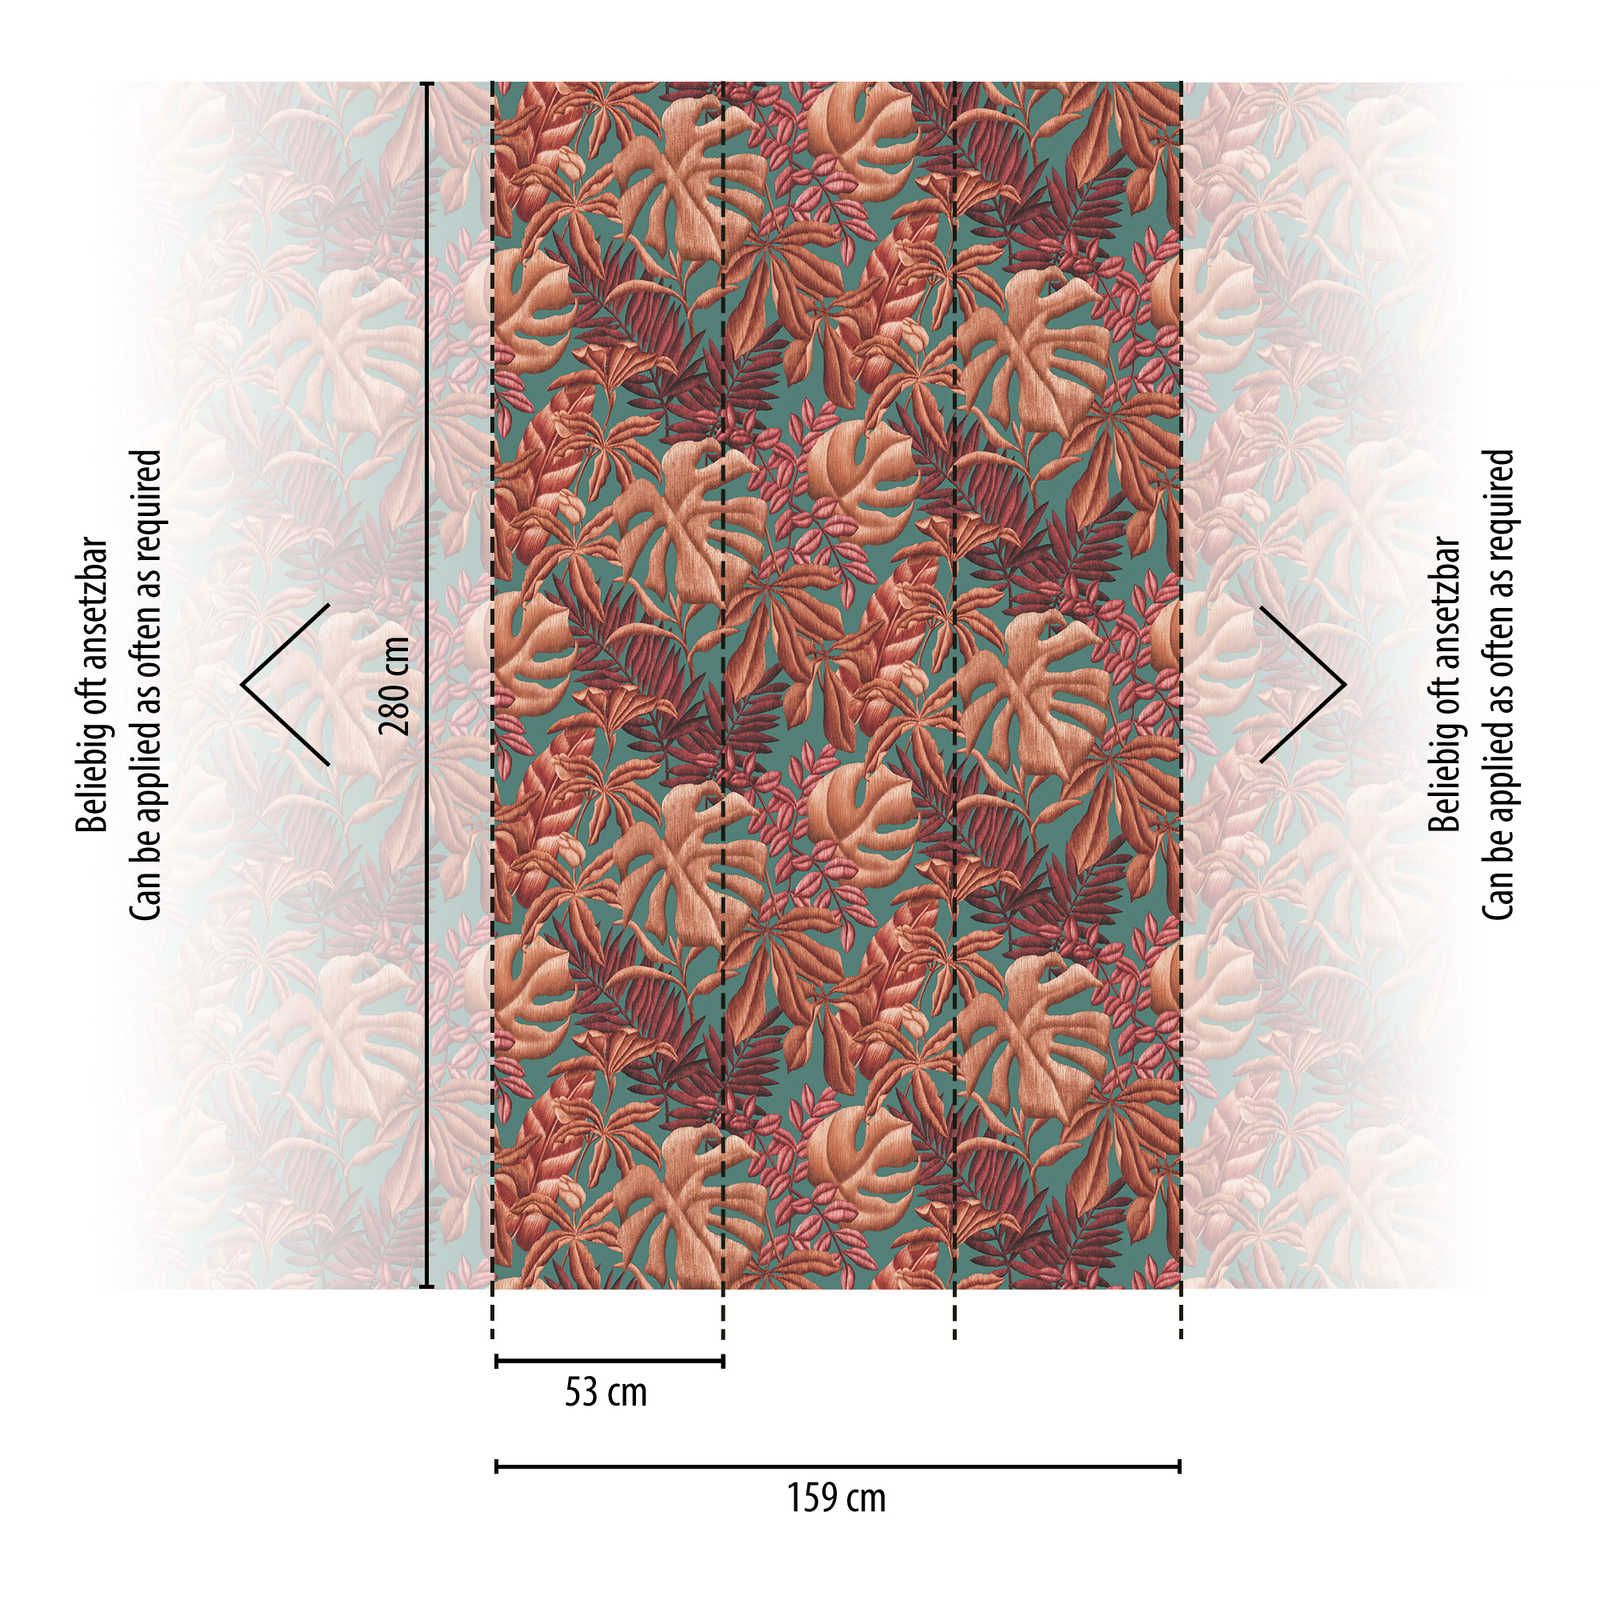             Wallpaper with large-scale leaf pattern fern & banana leaves - red, orange, turquoise
        